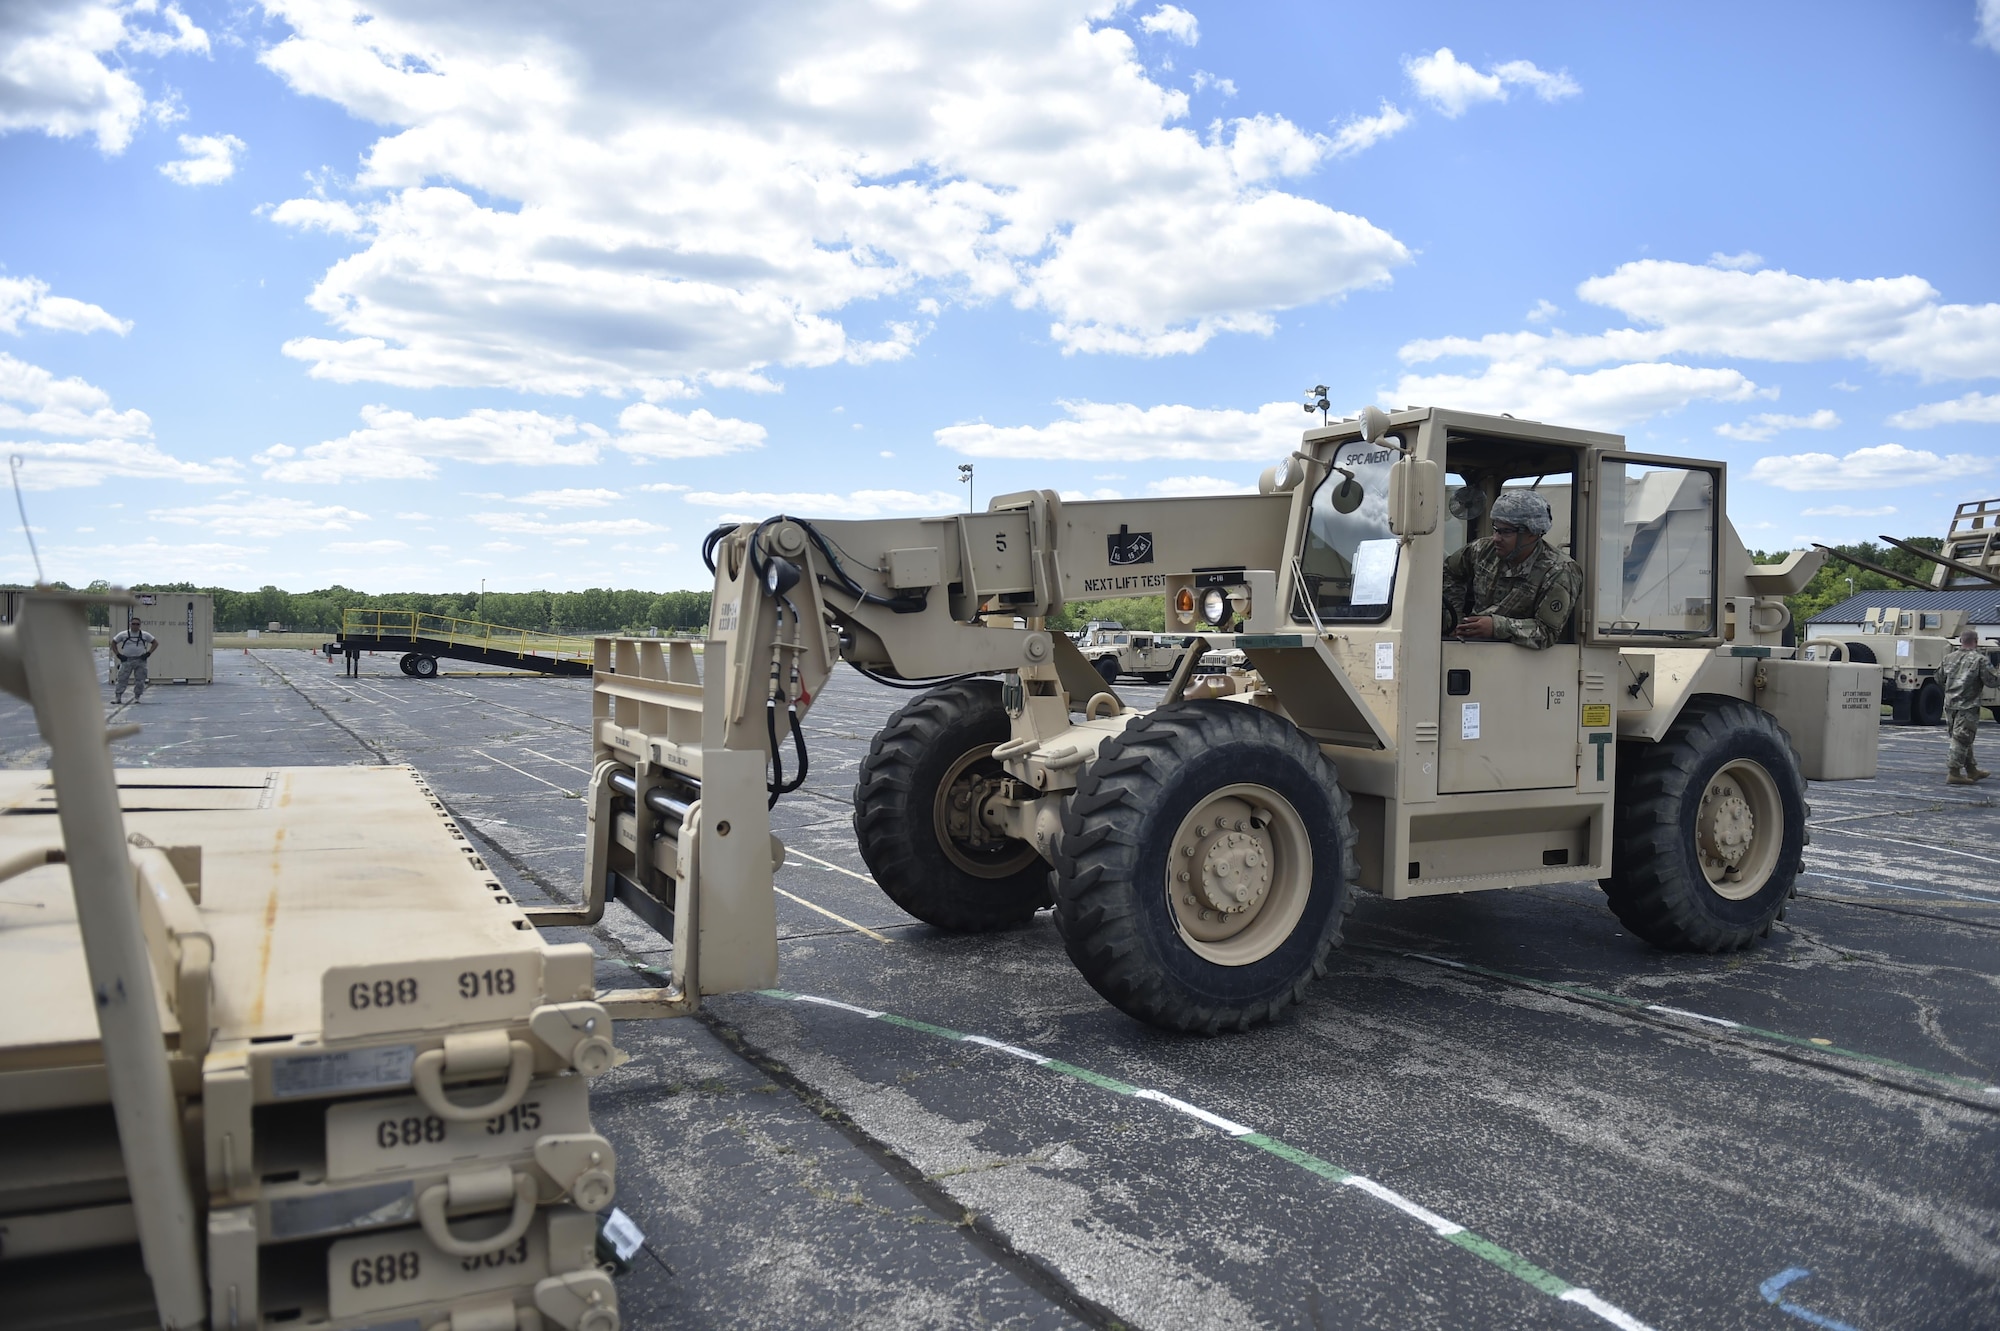 Spc. Matthew Avery, 688th Rapid Port Opening Element, moves equipment to the cargo staging area in preparation to move supplies to the forward distribution node, to establish a theater level logistics flow during Exercise Turbo Distribution 17-02, June 7, 2017, at Battle Creek Air National Guard Base, Mich.  The Joint Task Force-Port Opening element specializes in rapidly establishing hubs for cargo distribution operations worldwide, to include remote or damaged locations, on short notice.  (U.S. Photo by Tech. Sgt. Liliana Moreno/Released)